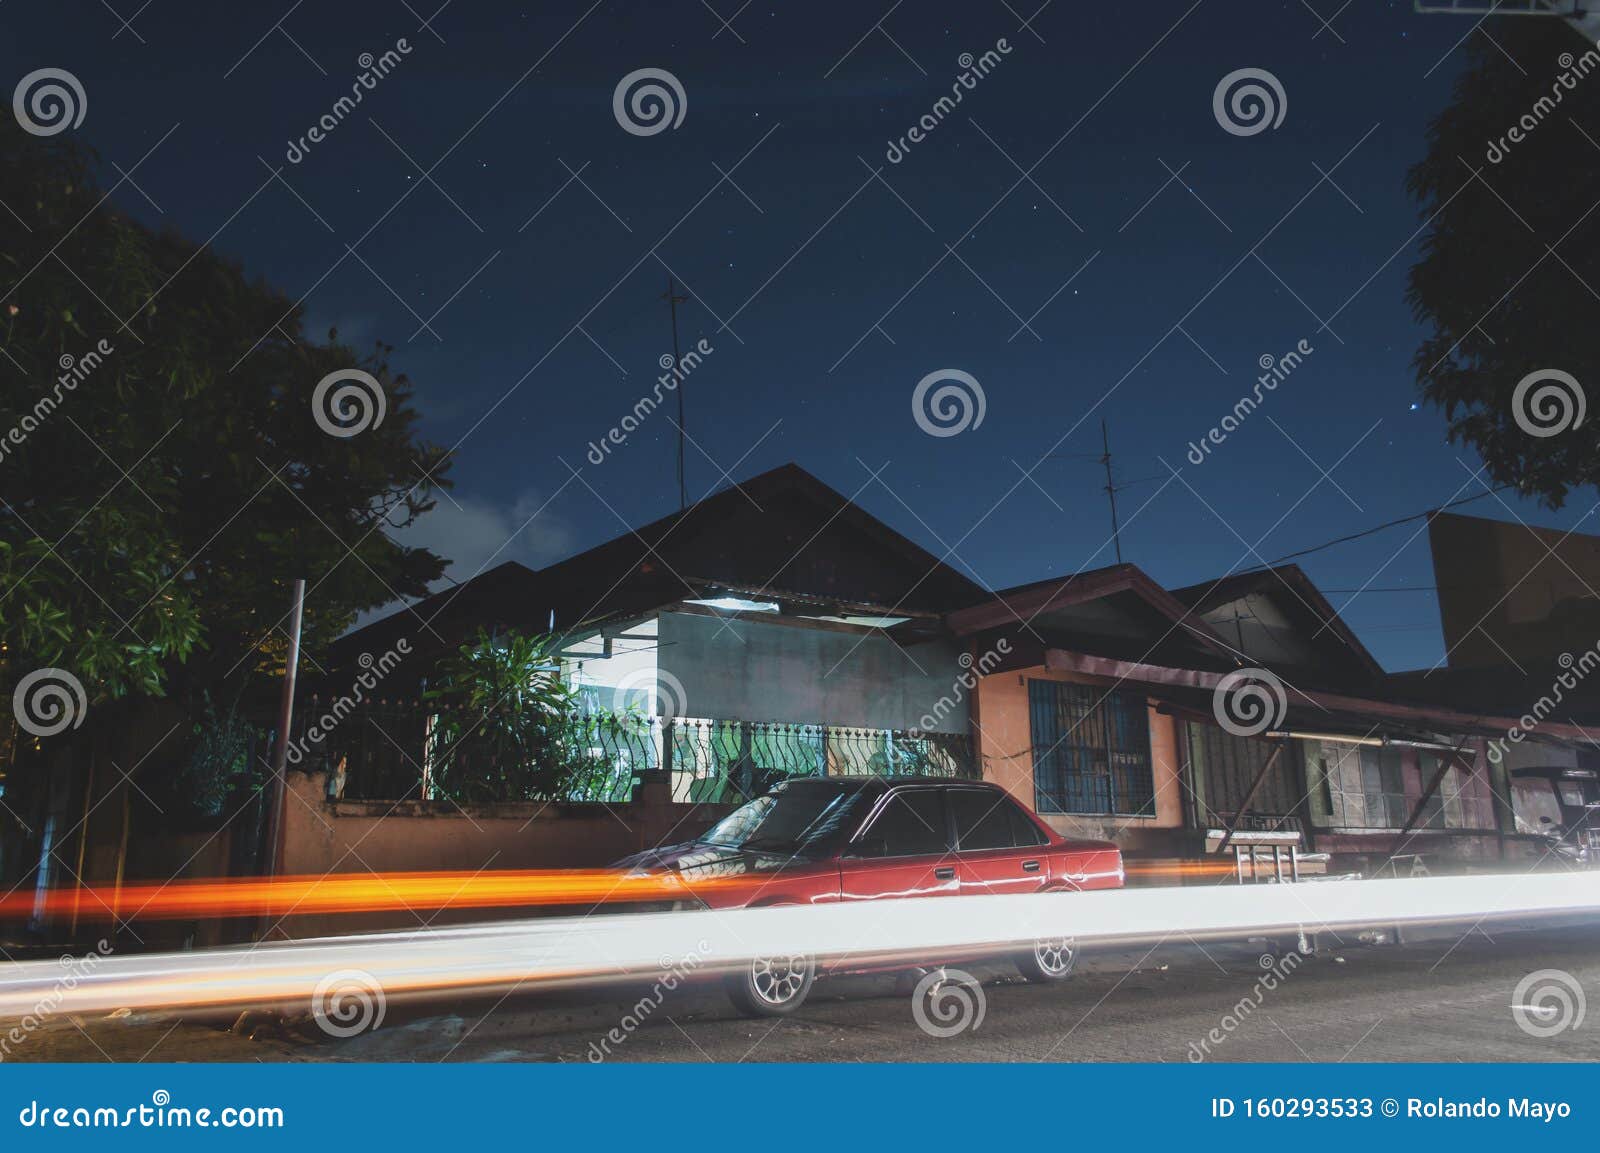 Long Exposure Shot Of Simple Bungalow Concrete House In A Subdivision In An Urban Area In The Philippines With A Cat Under The Car Stock Image Image Of Dark Simple 160293533